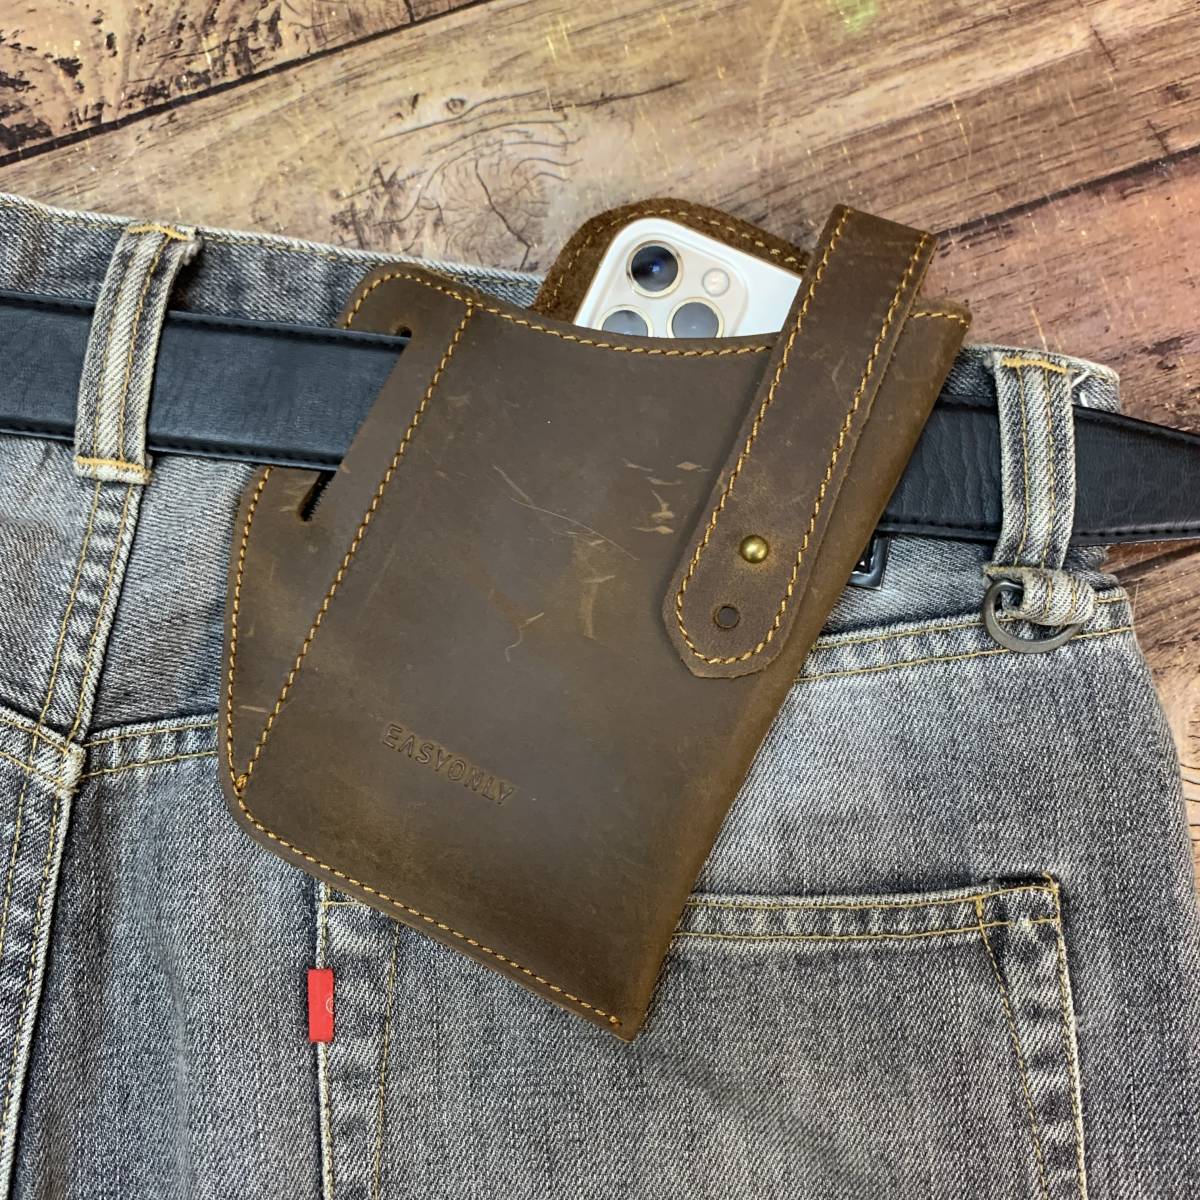  new goods original leather mobile holder ho ru Star smartphone iPhone waist bag pouch n back dark brown telephone inserting outdoor free shipping 